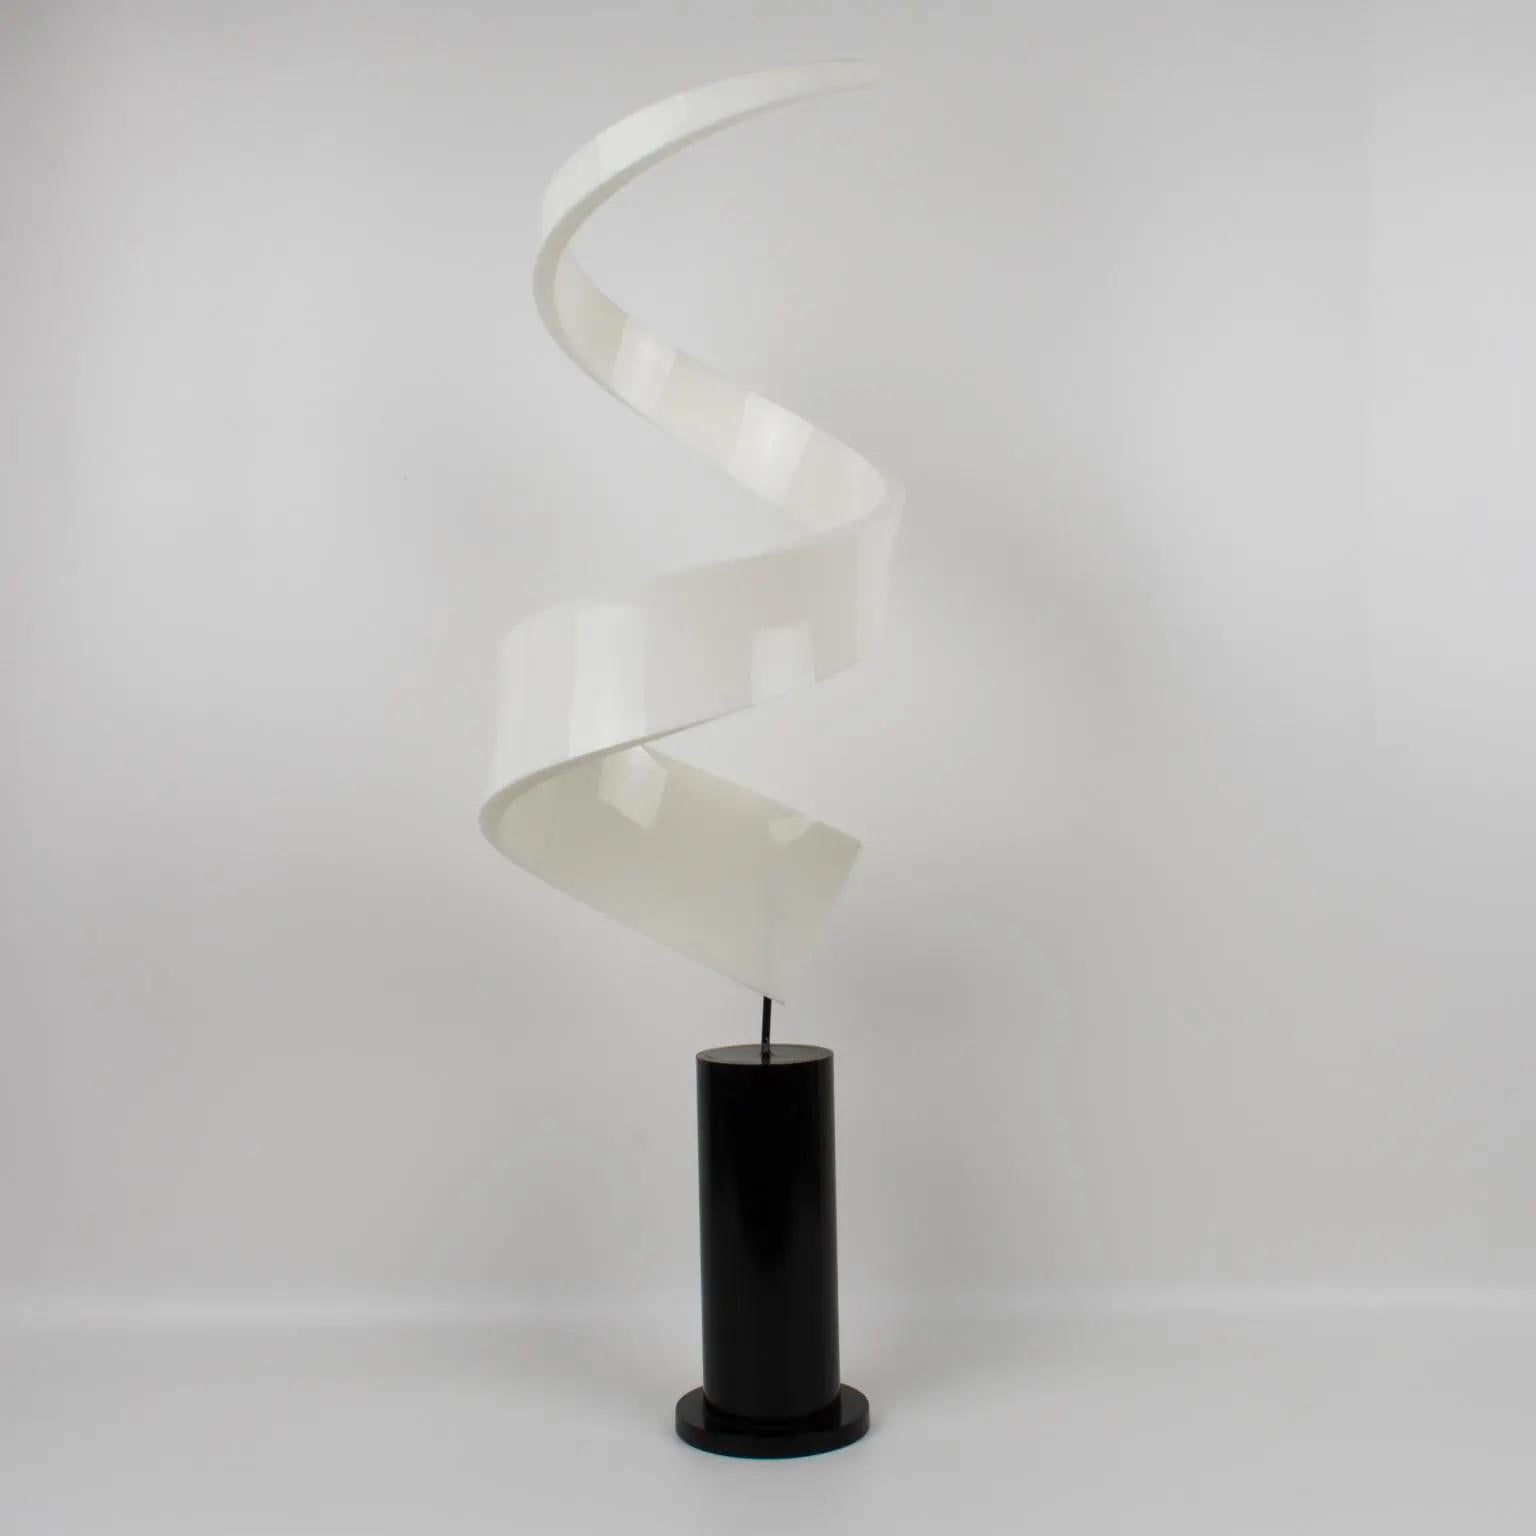 Stunning 1970s Lucite or Plexiglass sculpture. Abstract geometrical swirl shape, with milky white color mounted on a tall, stepped black Lucite or acrylic base. The piece boasts different visual effects from each side. There is no visible maker's